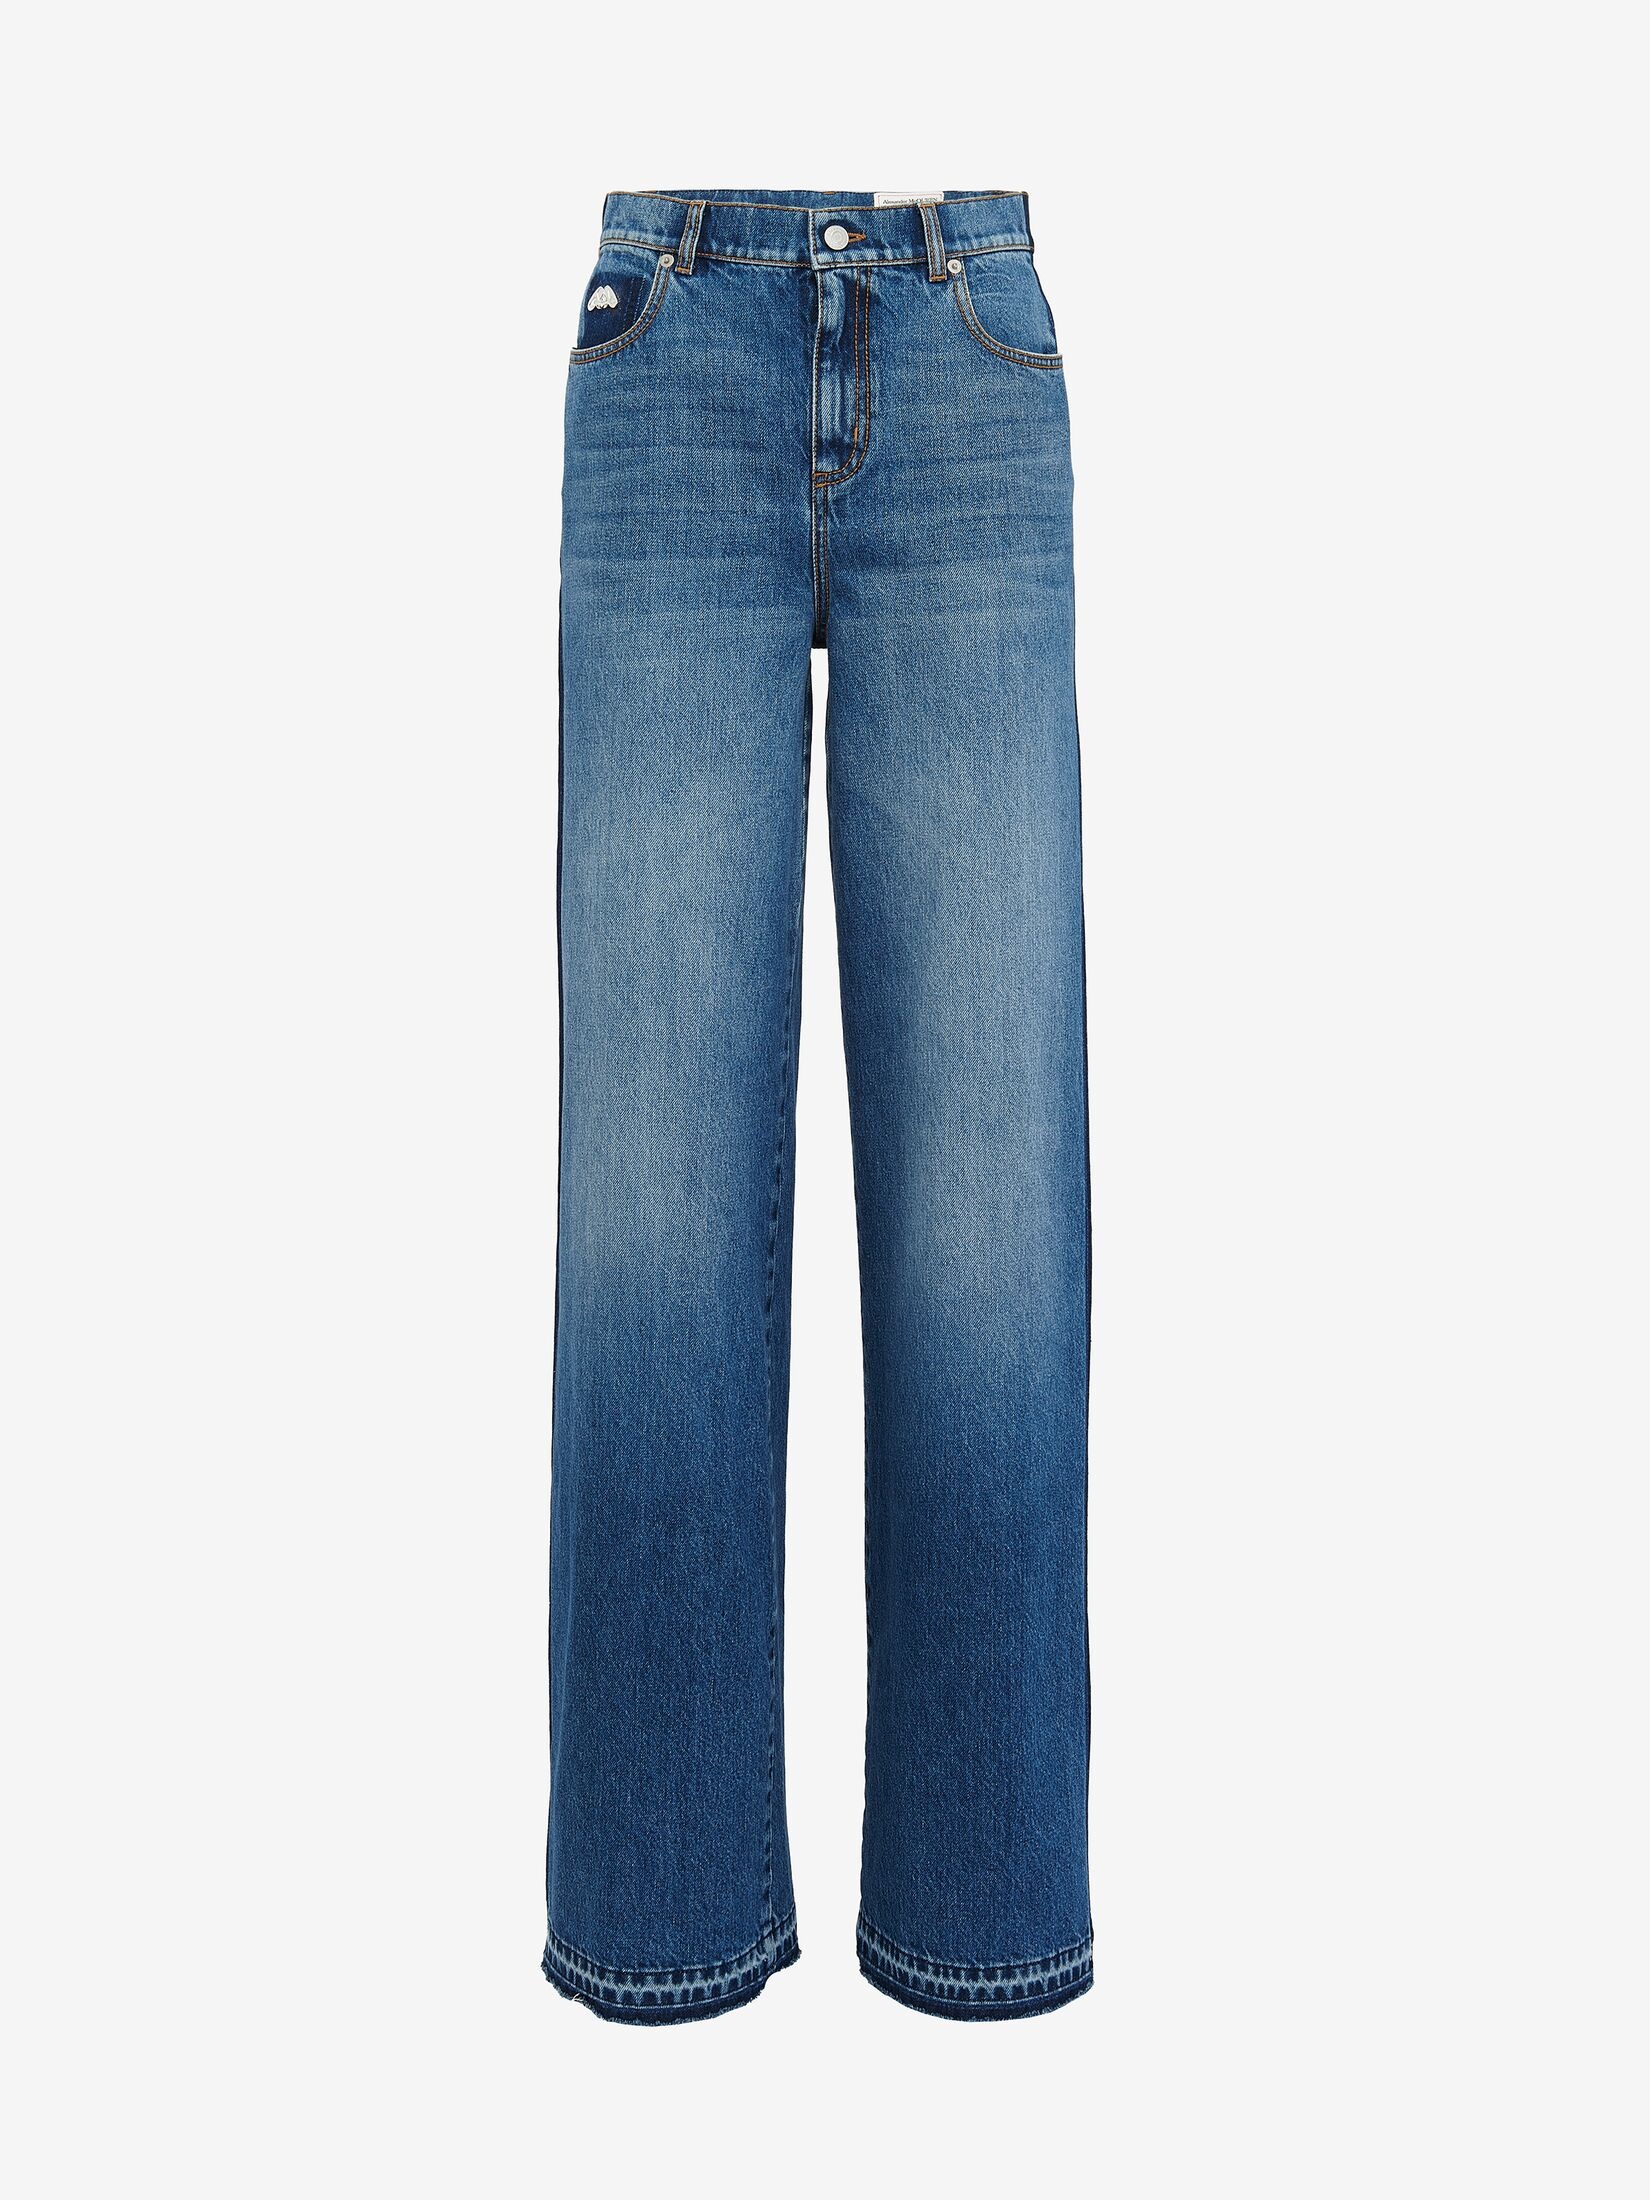 Women's High-waisted Wide Leg Jeans in Washed Blue - 1